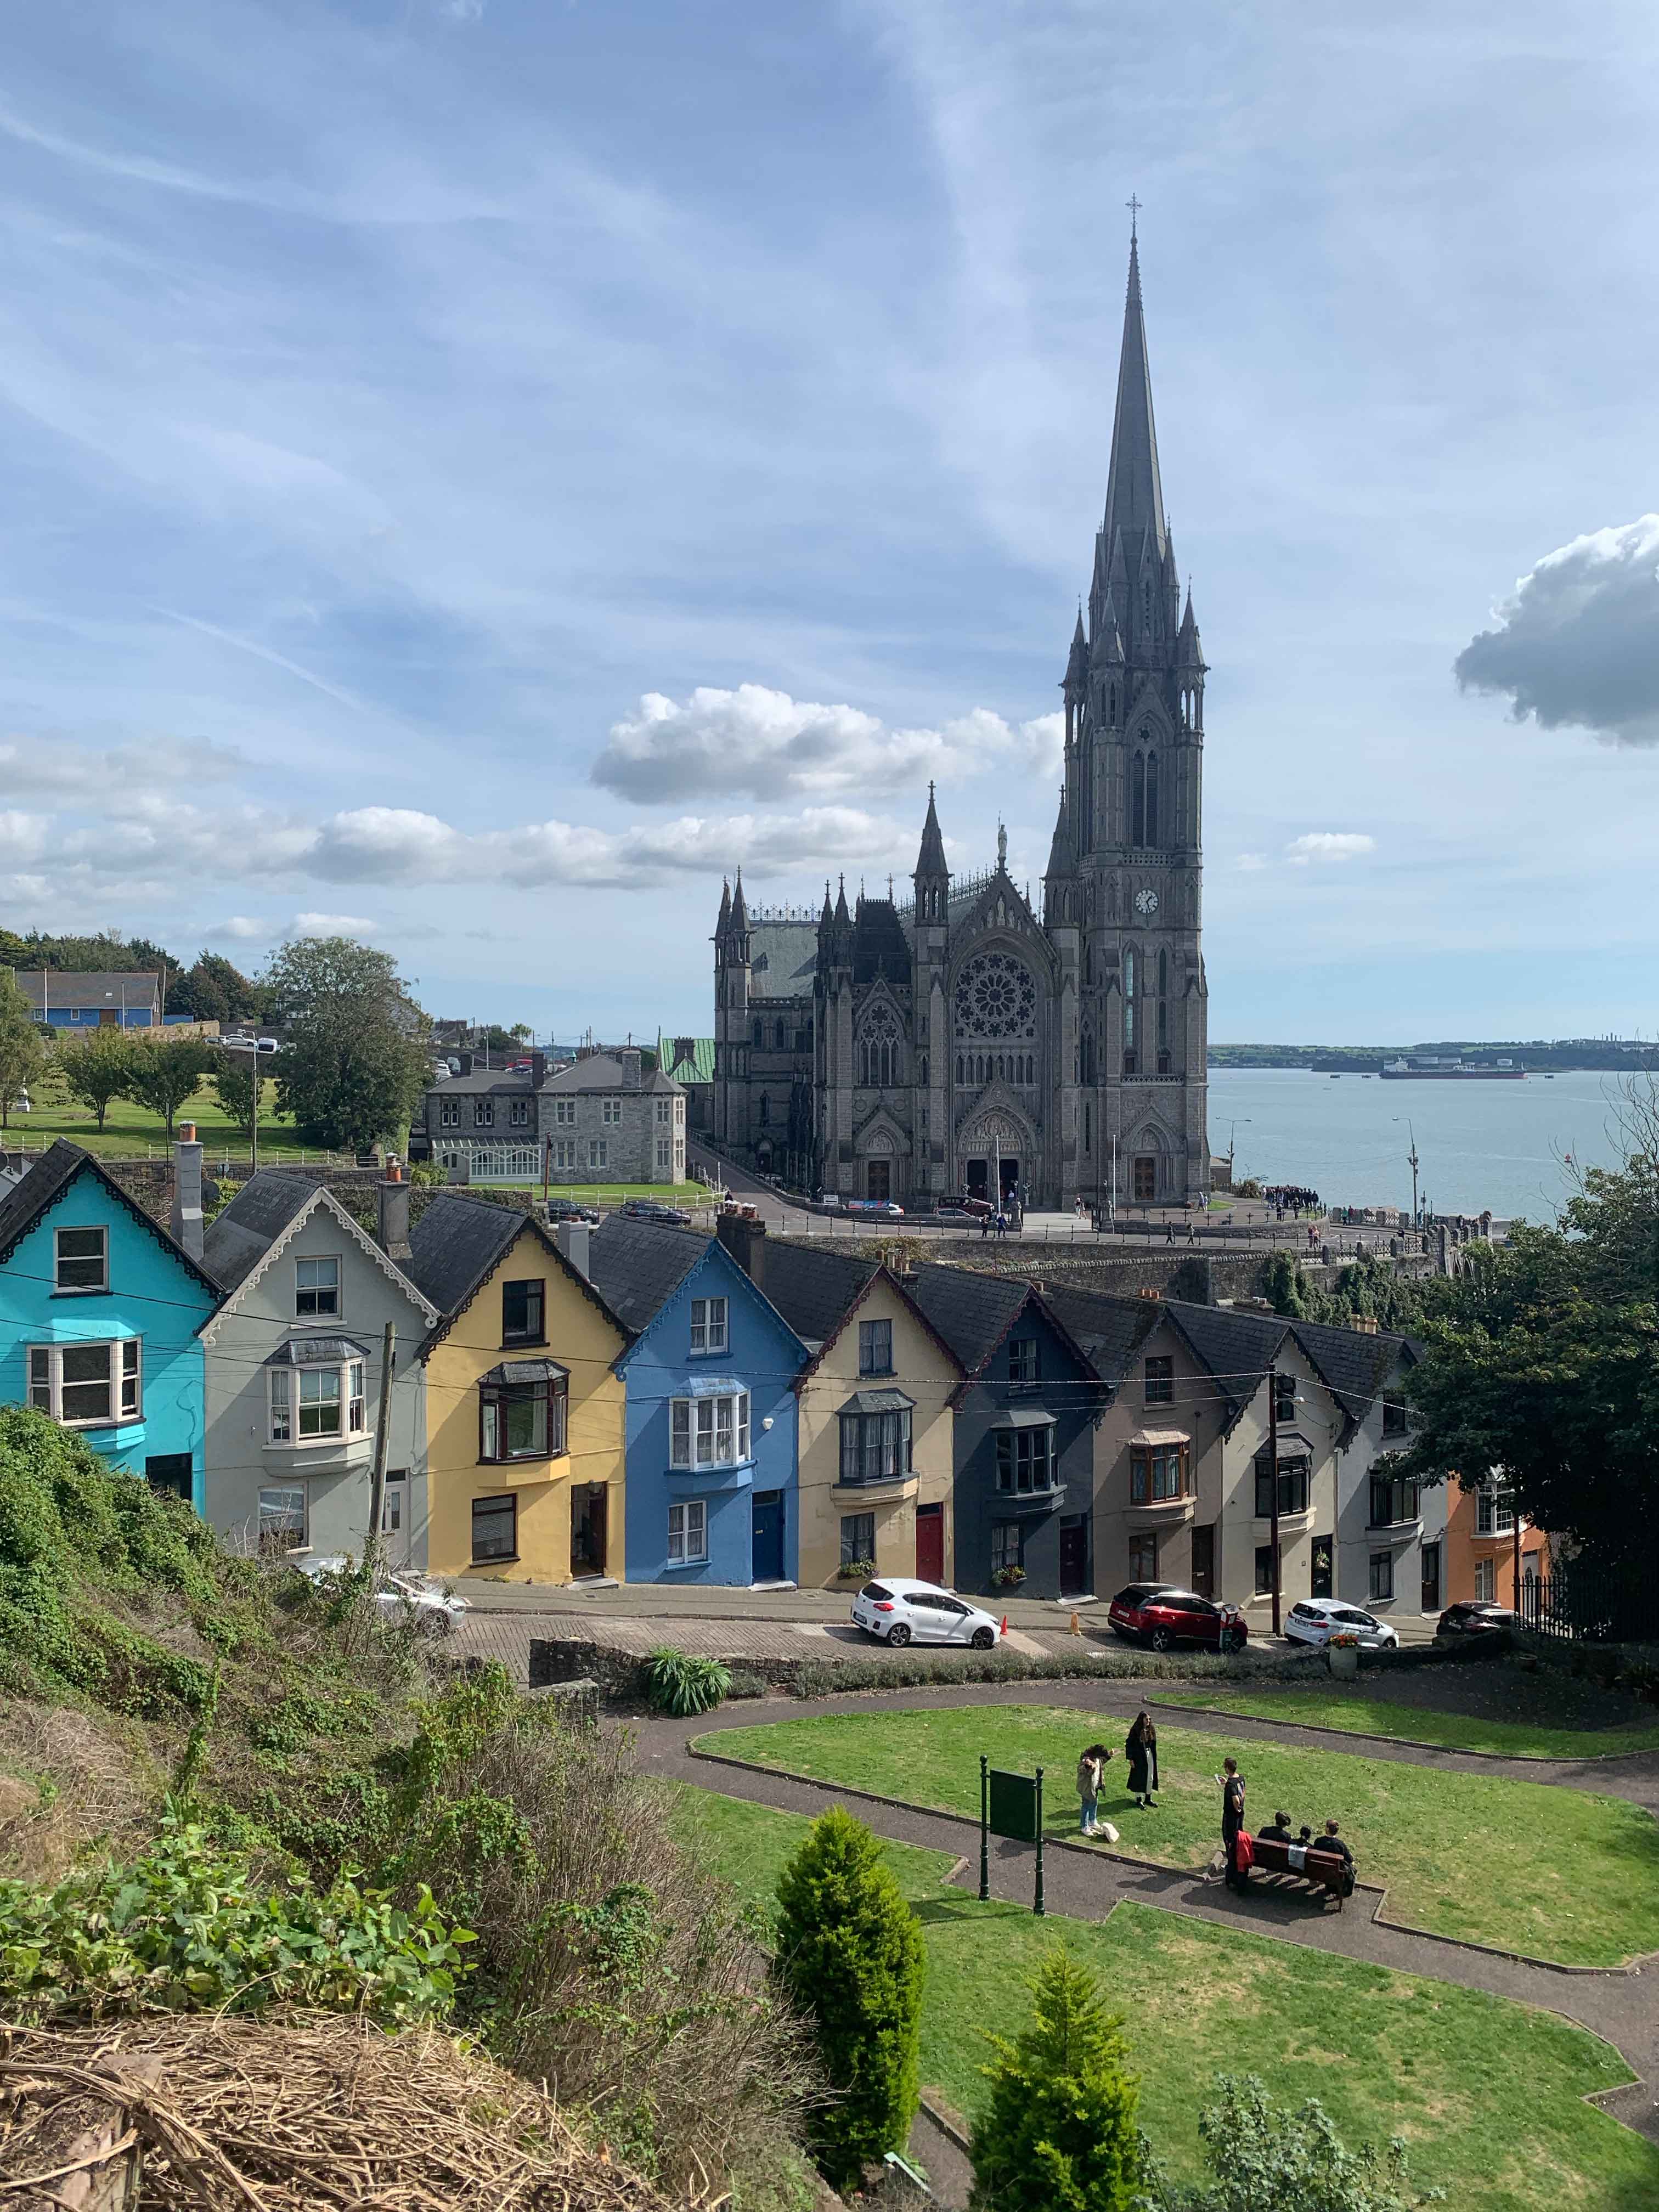 Row of houses and large church in Cobh, Ireland